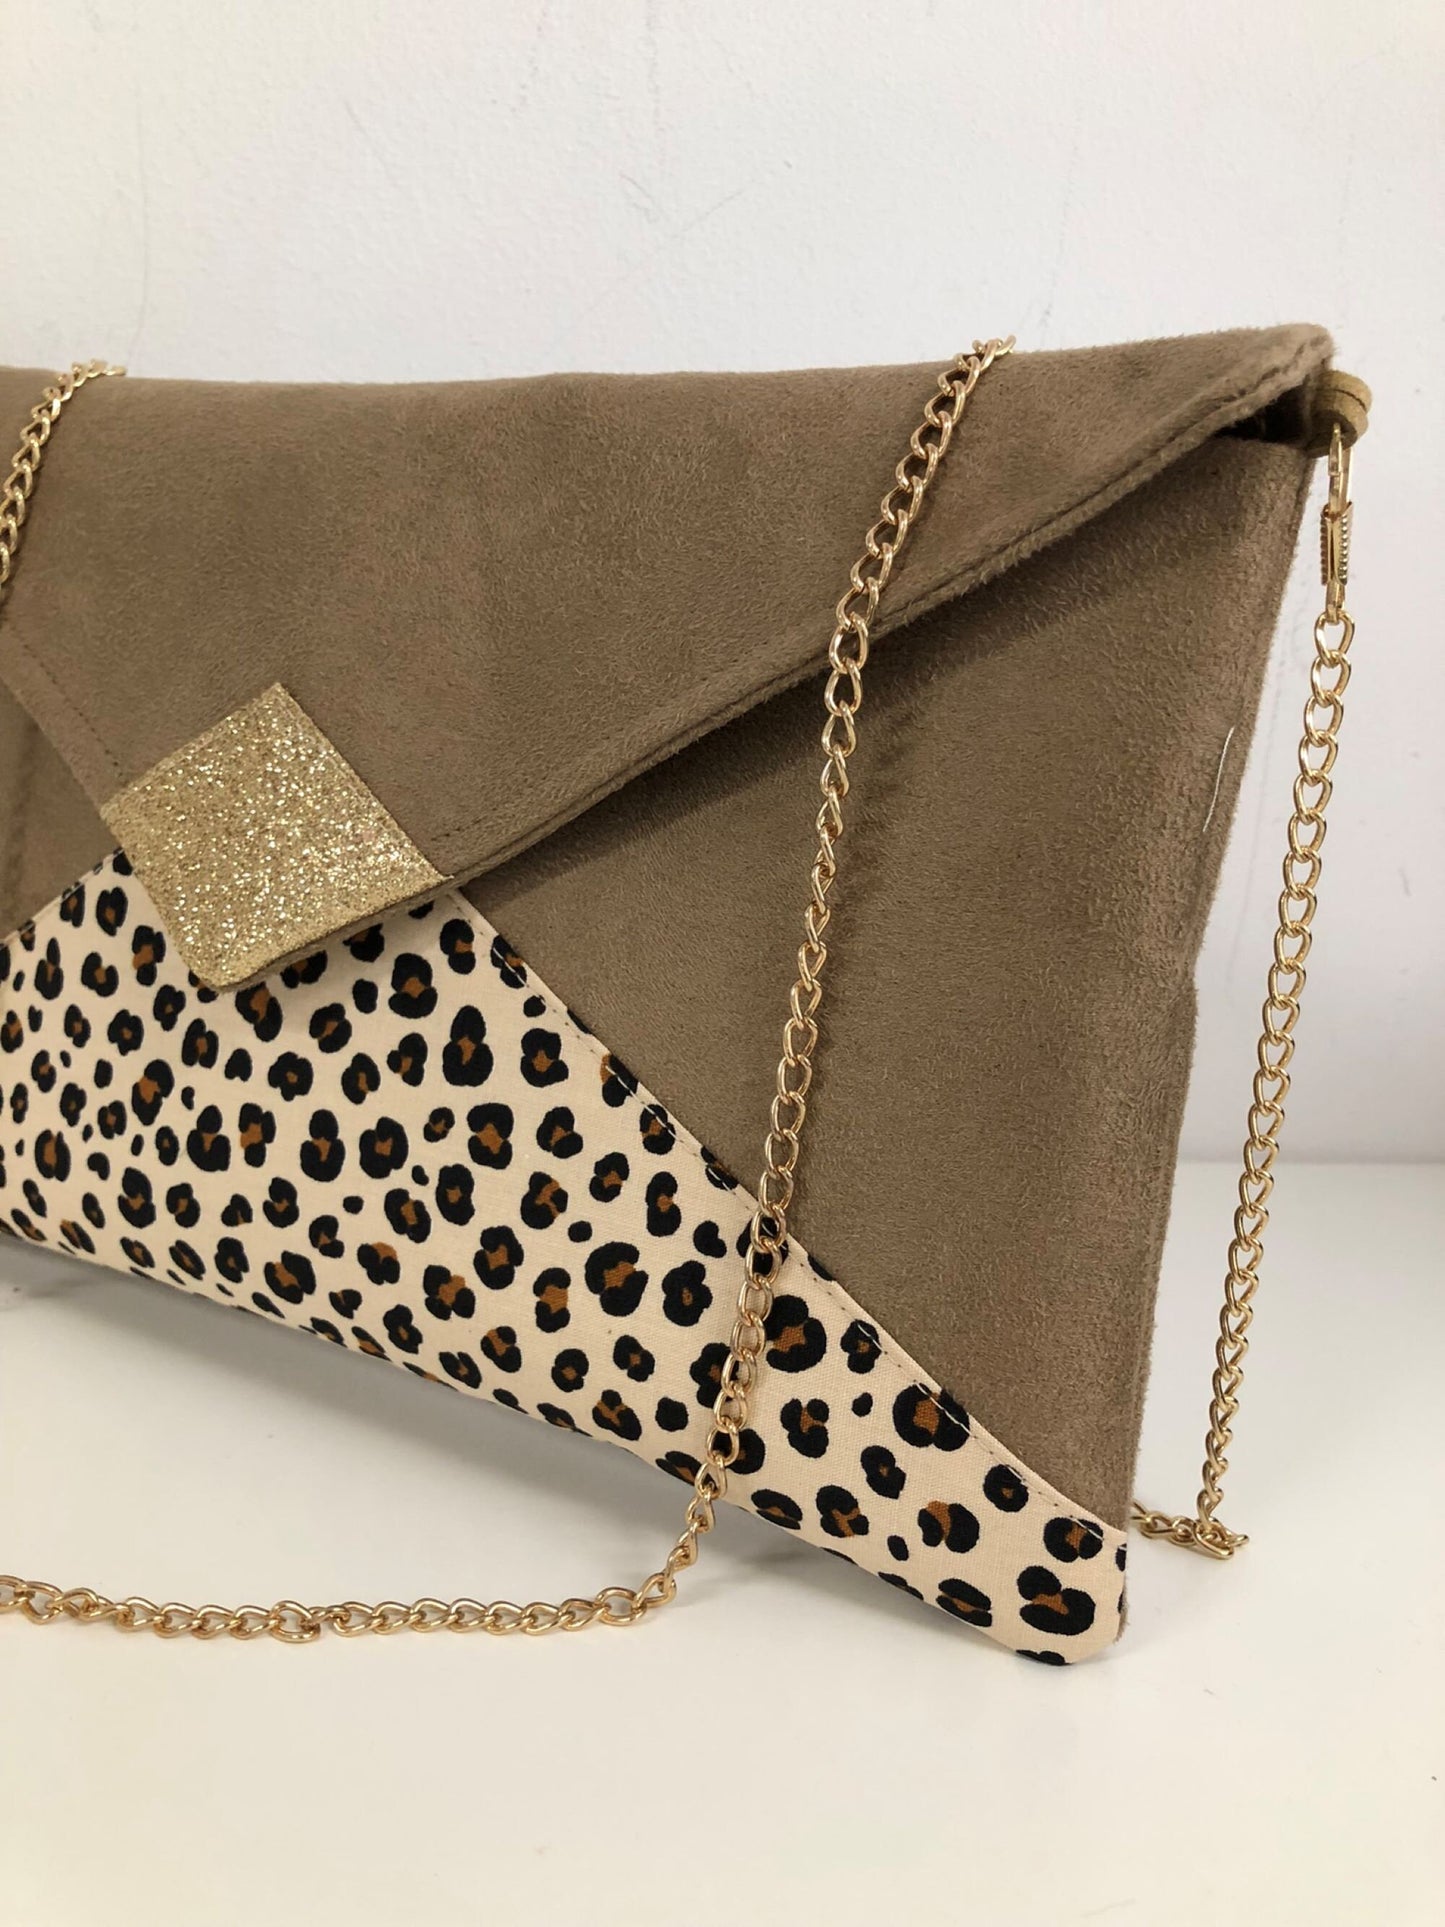 Isa camel clutch bag with animal motif and gold sequins